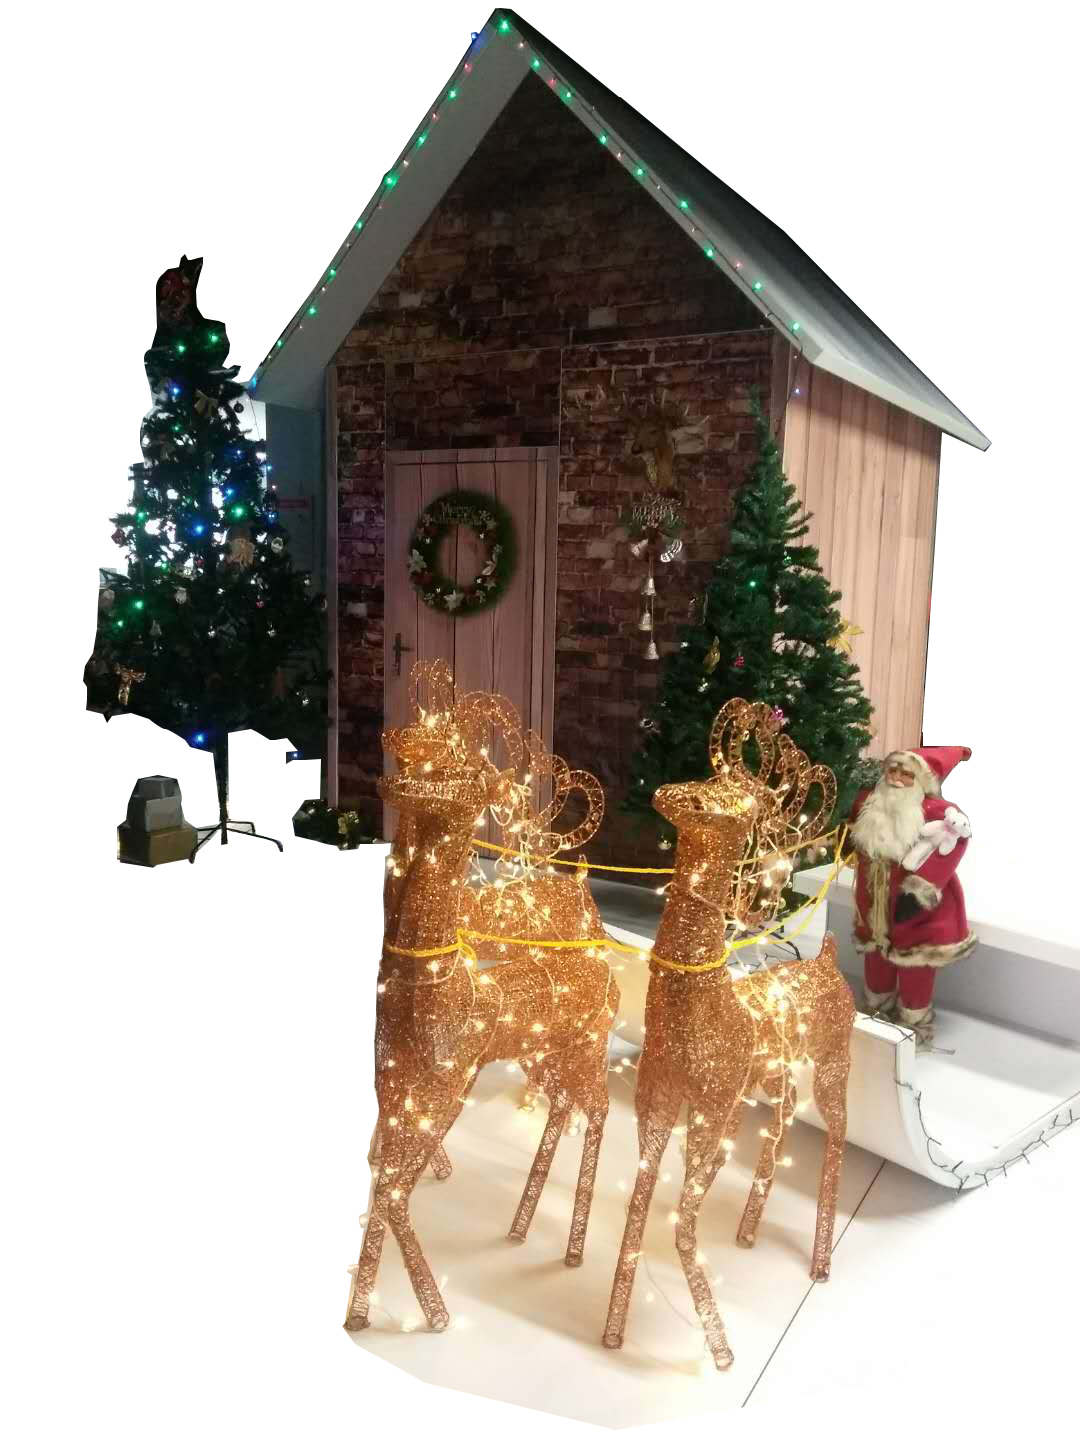 Modular m series systems that can be used as Christmas houses, castles, and custom trade show booths